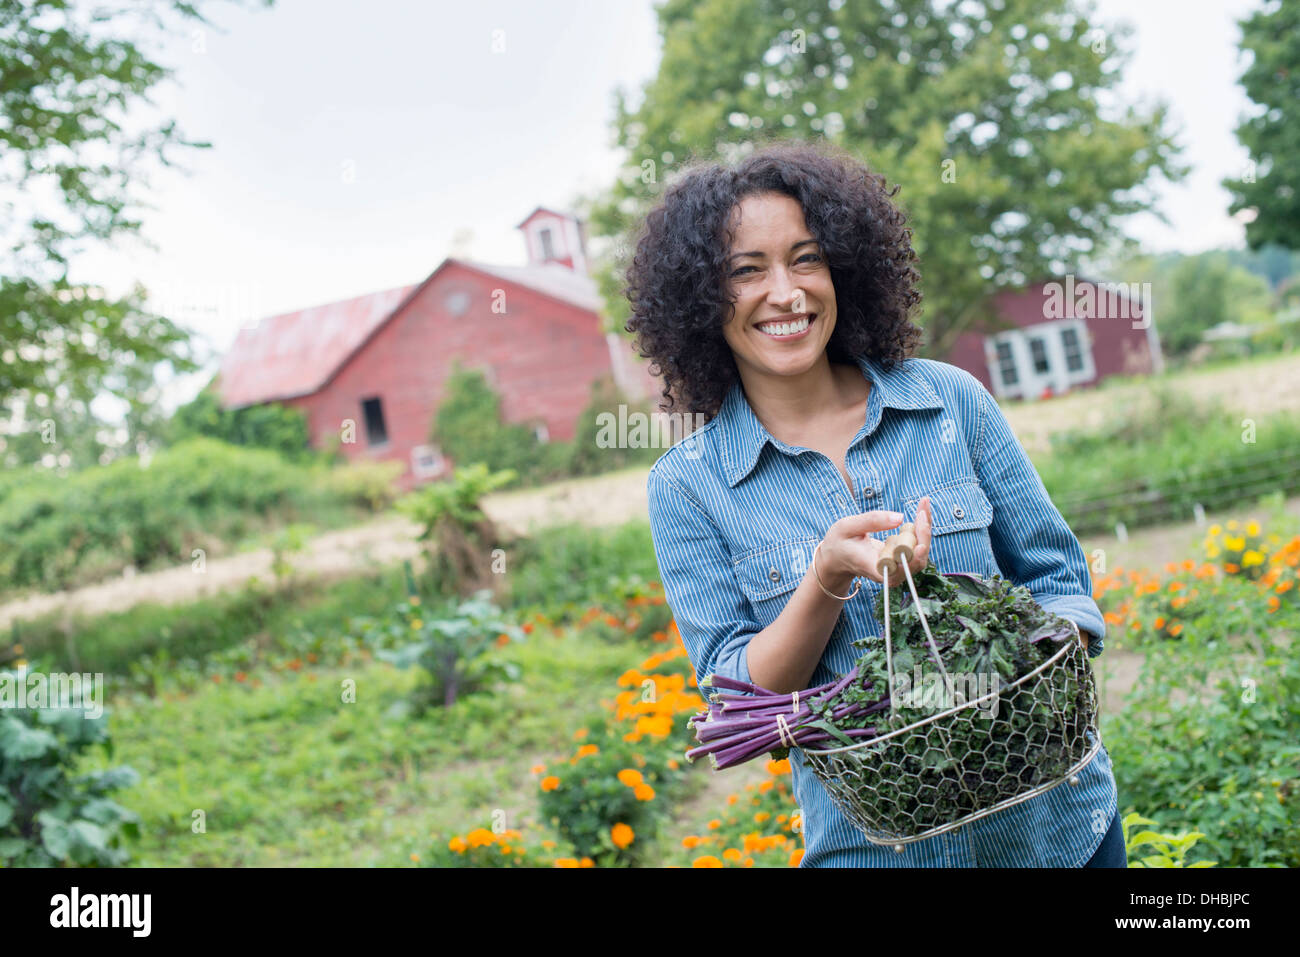 An organic vegetable garden on a farm. A woman carrying a basket of freshly harvested curly green leaves. Stock Photo